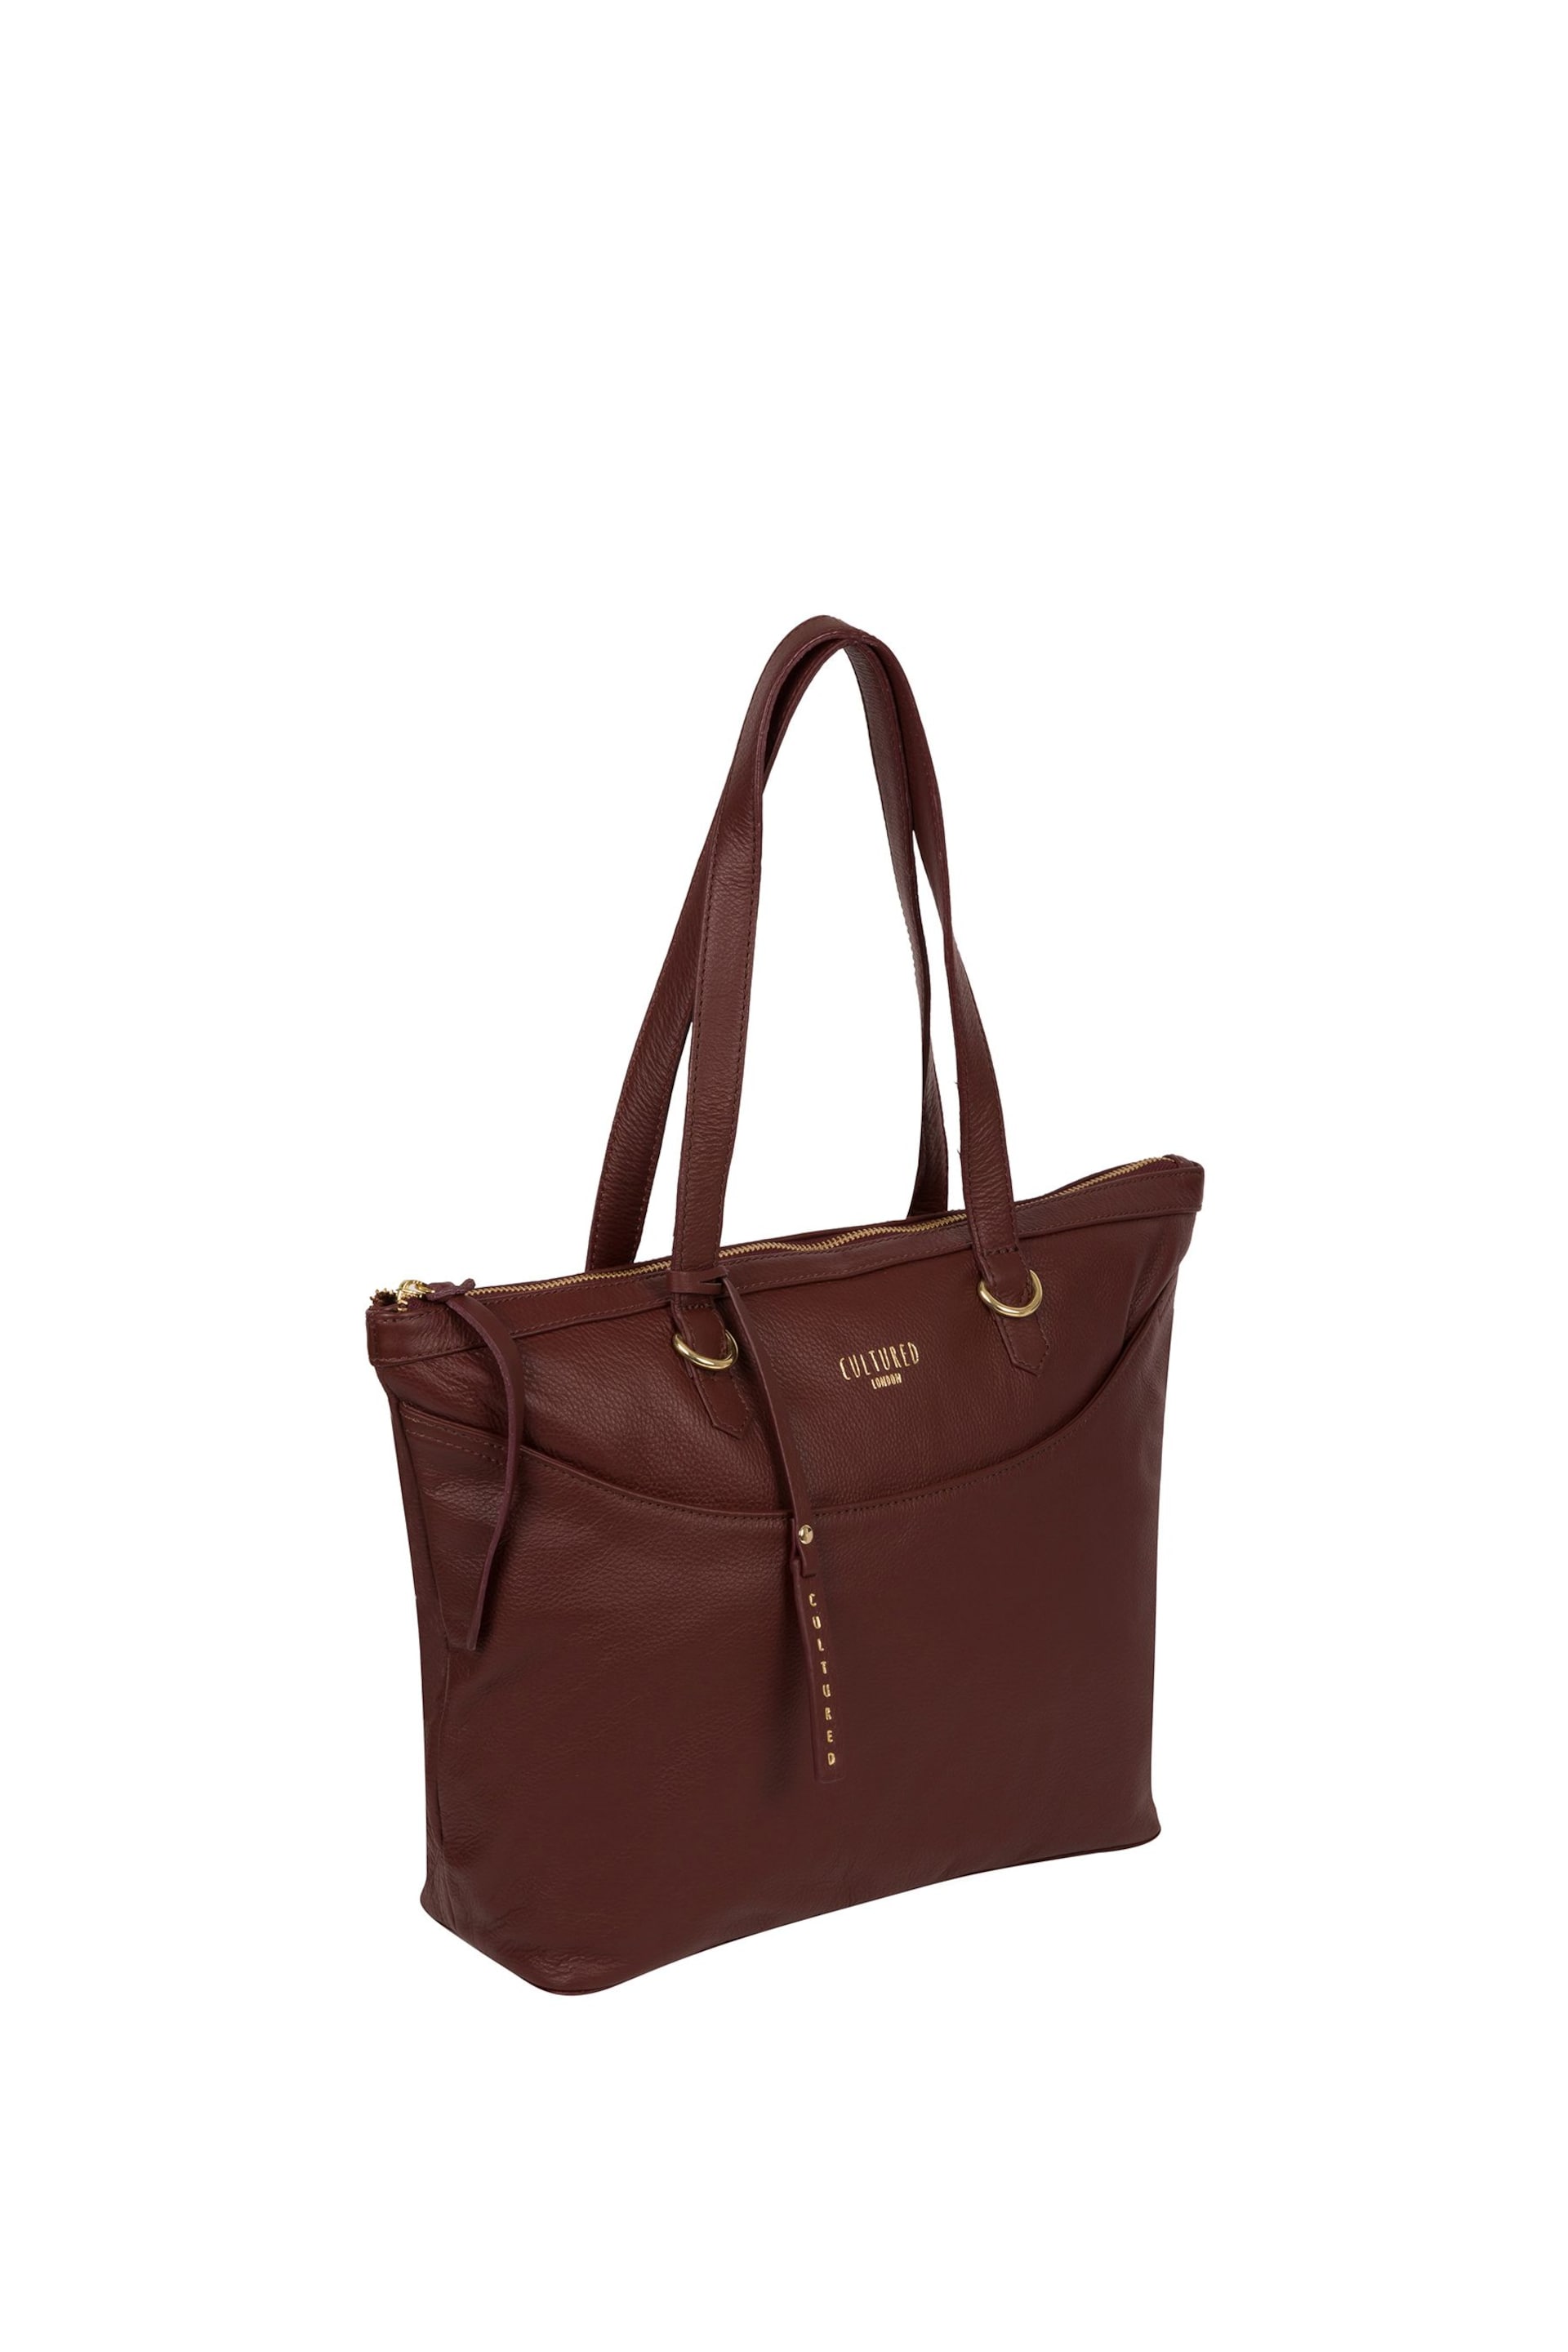 Cultured London Heston Leather Tote Bag - Image 3 of 5